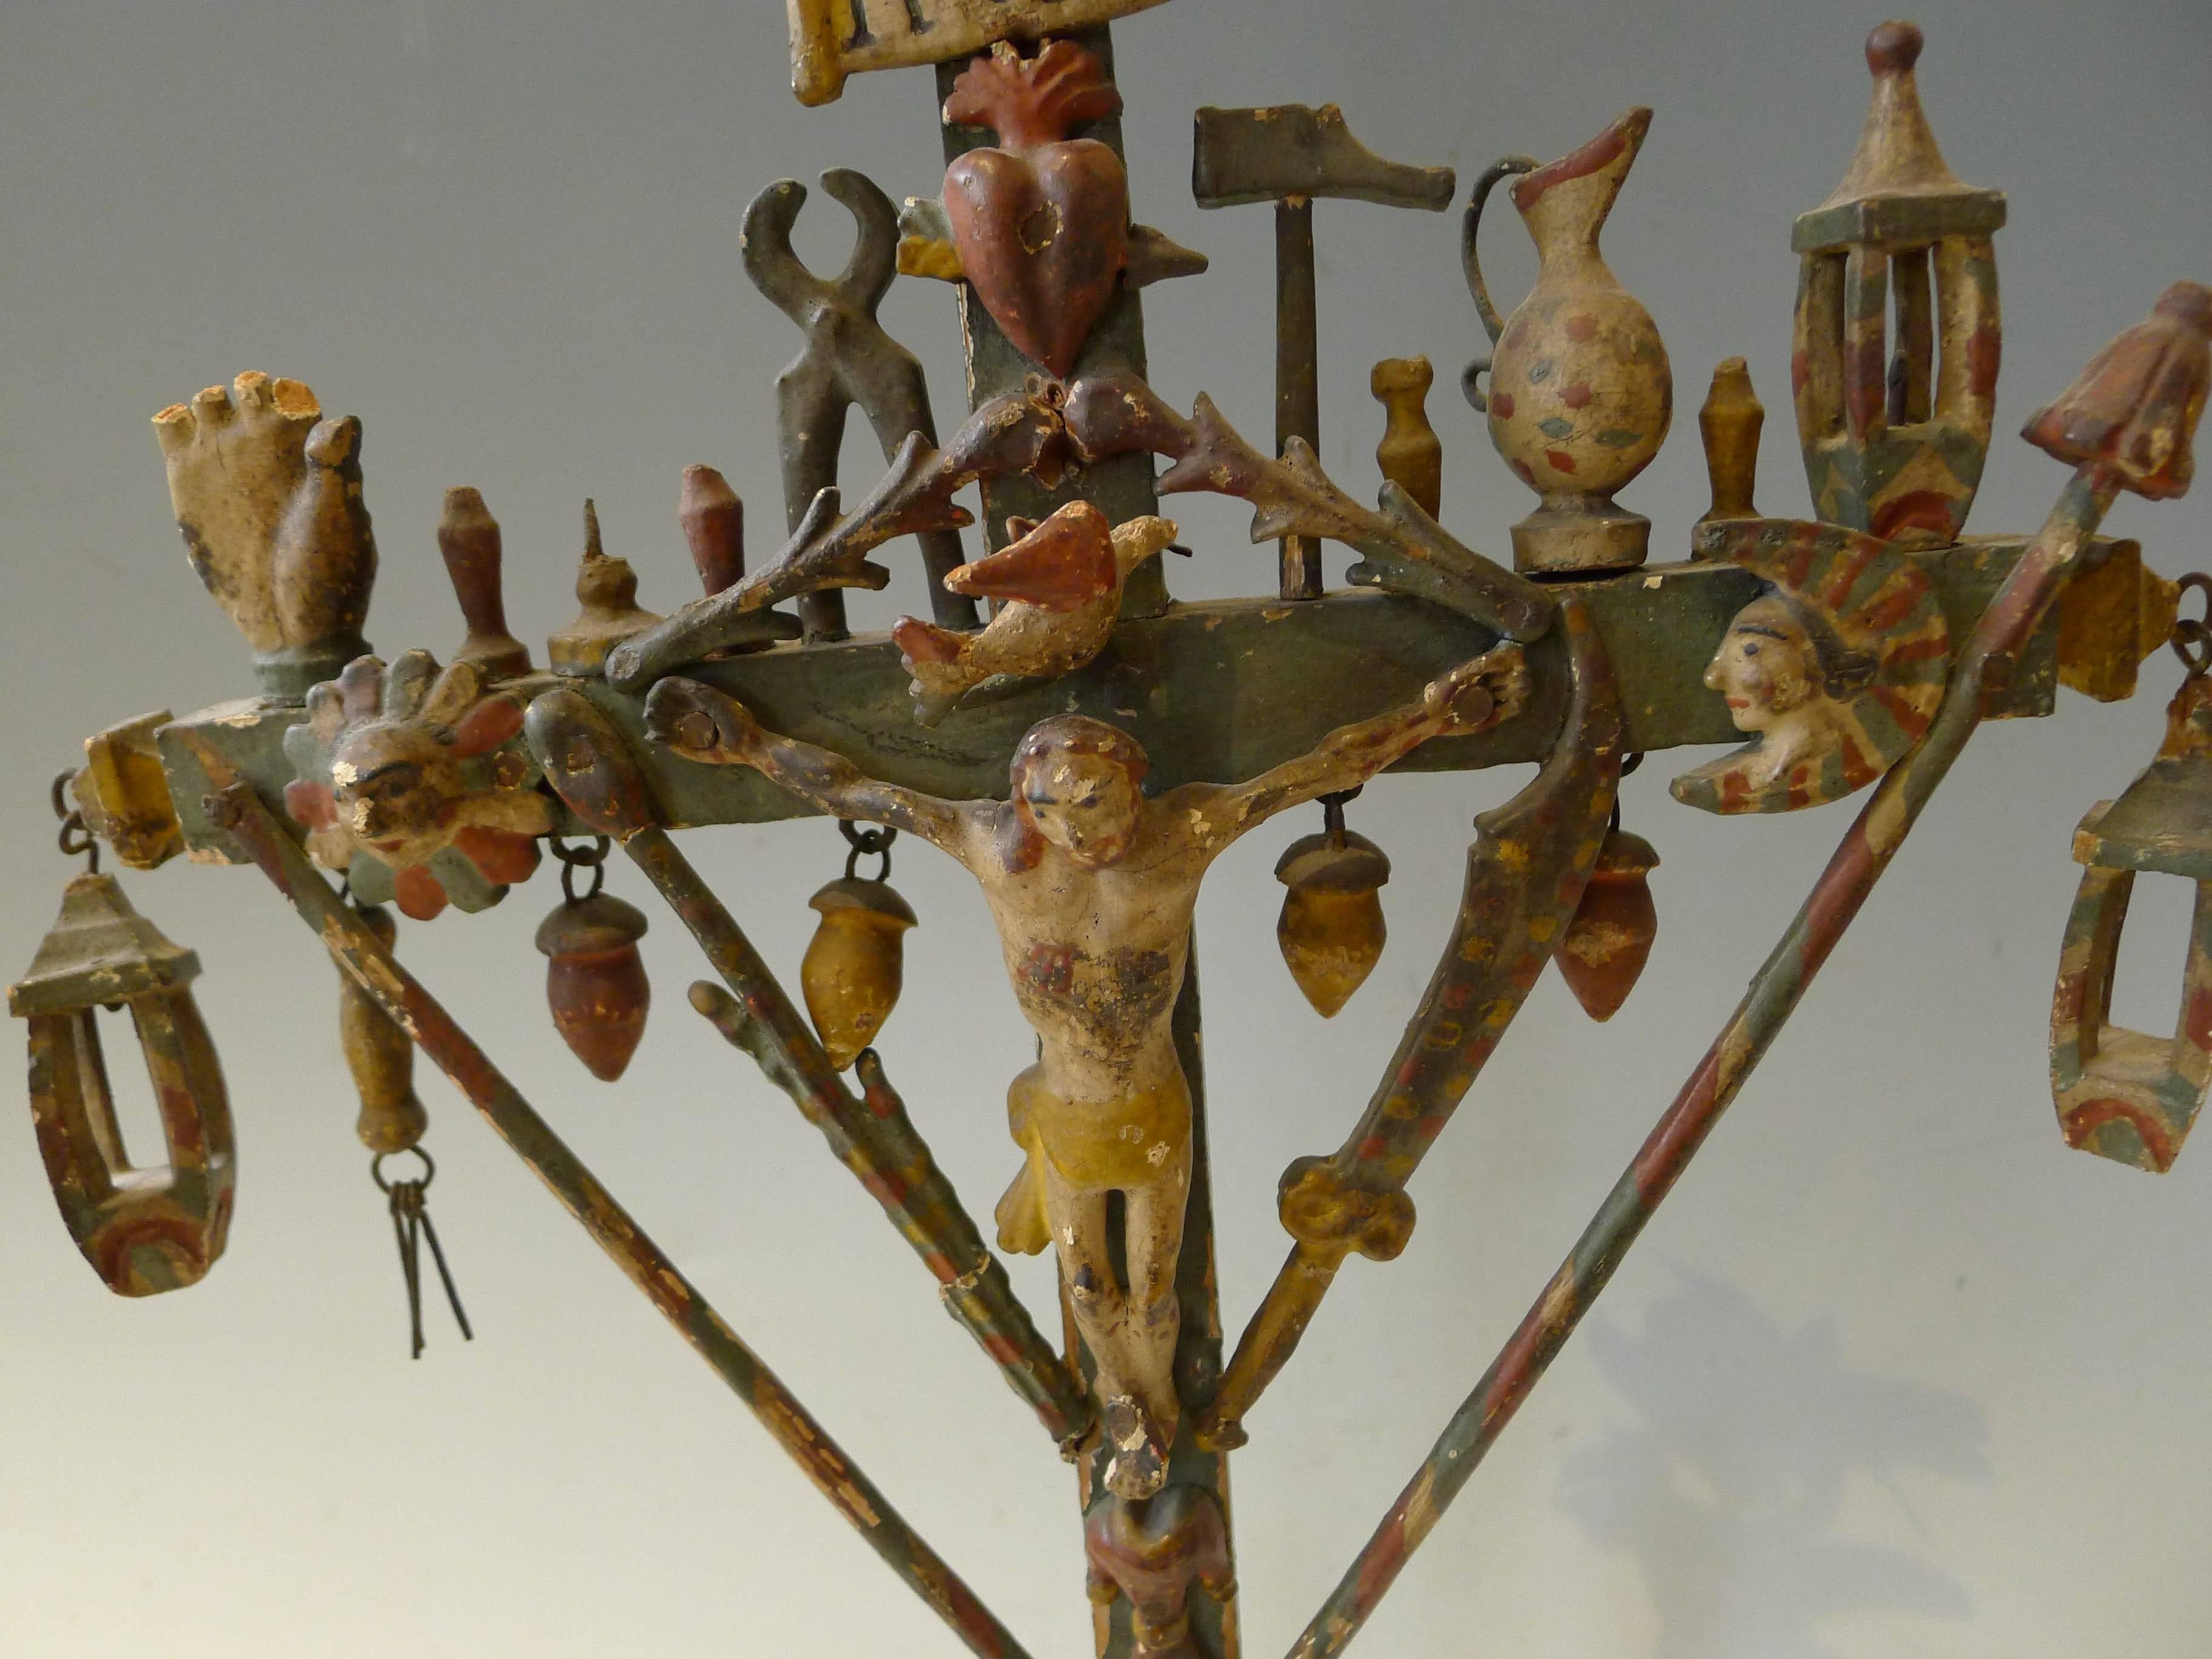 Cross in a sculptured boat with painted decoration polychromatic on green bottom.
The cross, with main instruments of the Passion, is dominated by an angel sharp of the trumpet
Religious crosses, raisedto the bow of boats and which have authority